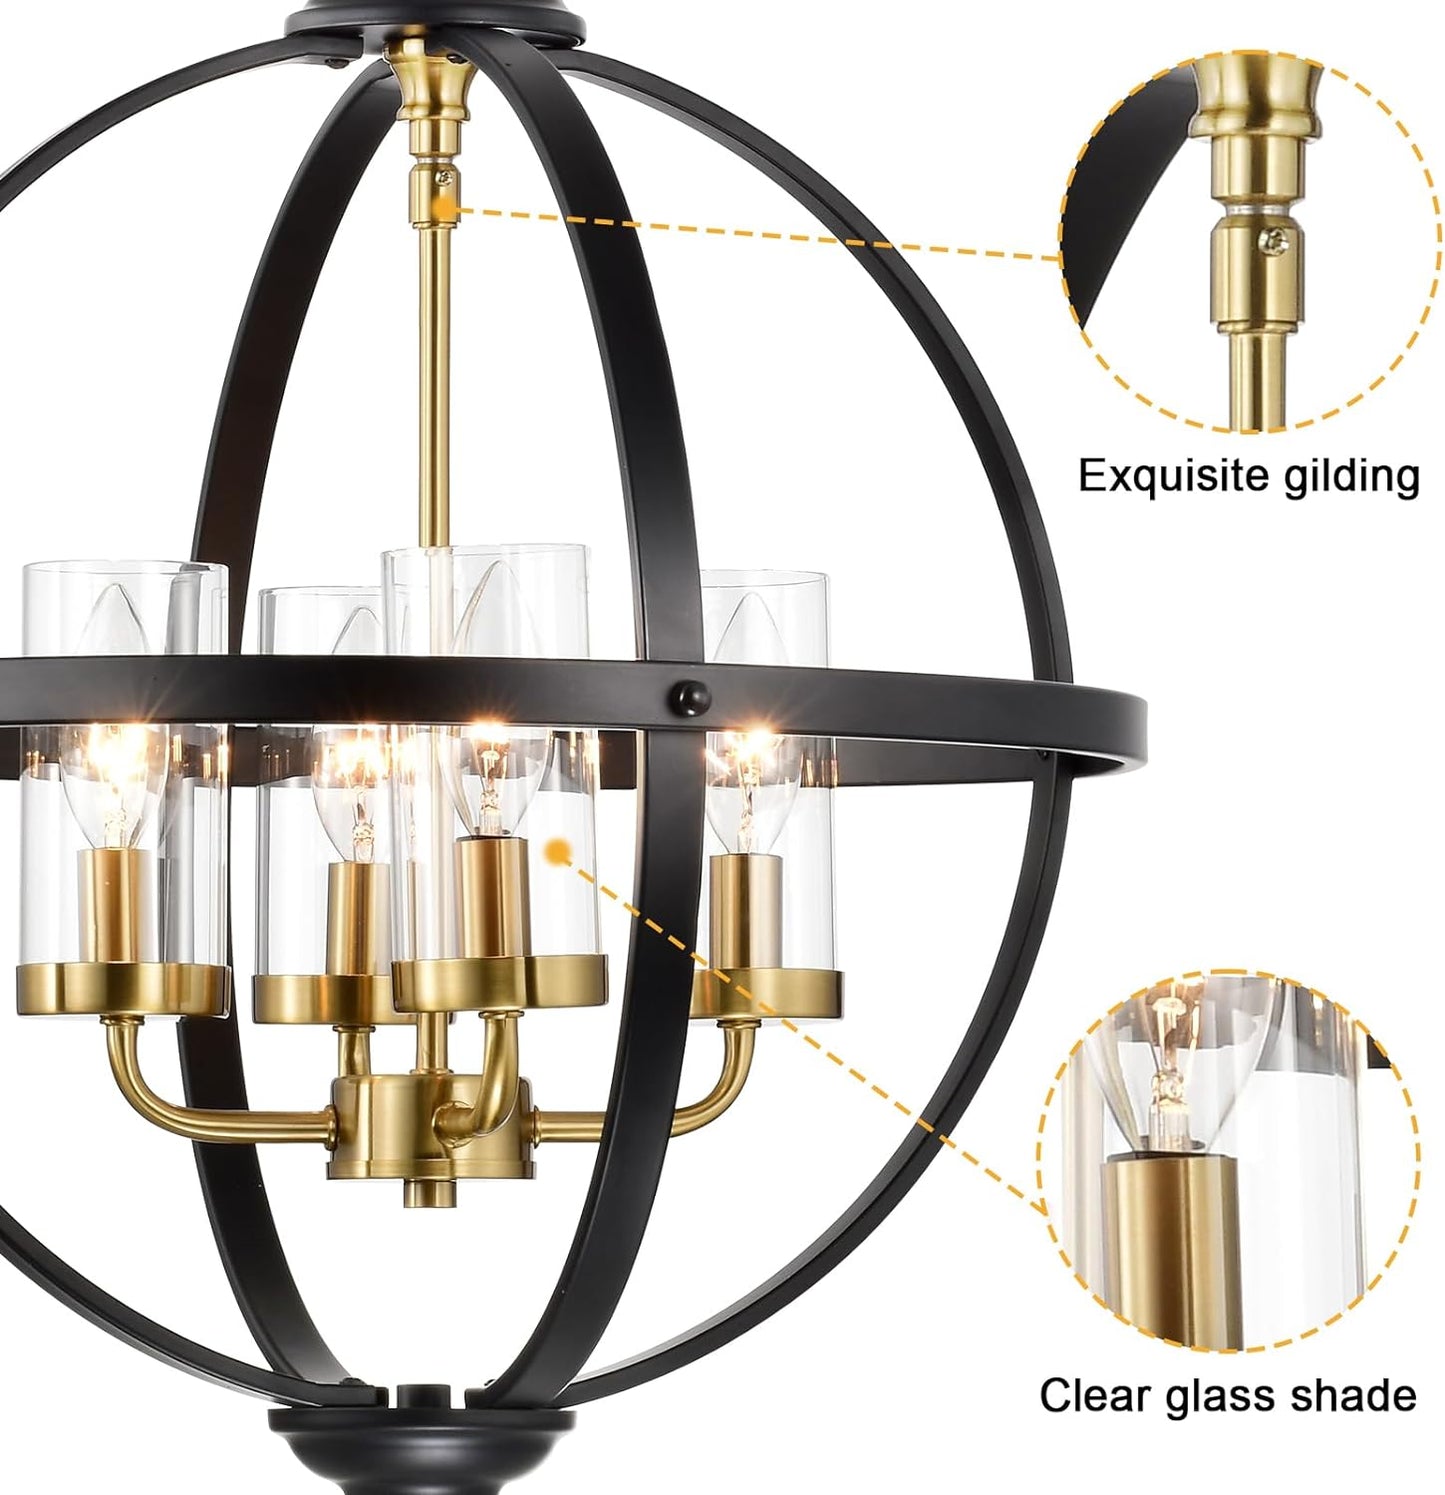 AvaMalis A|M Lighting Rustic Chandelier, 20" Black and Gold Finish Glass Cover Luxurious Hanging Light, 4 Lights Globe Vintage Pendant Ceiling Light Fixtures